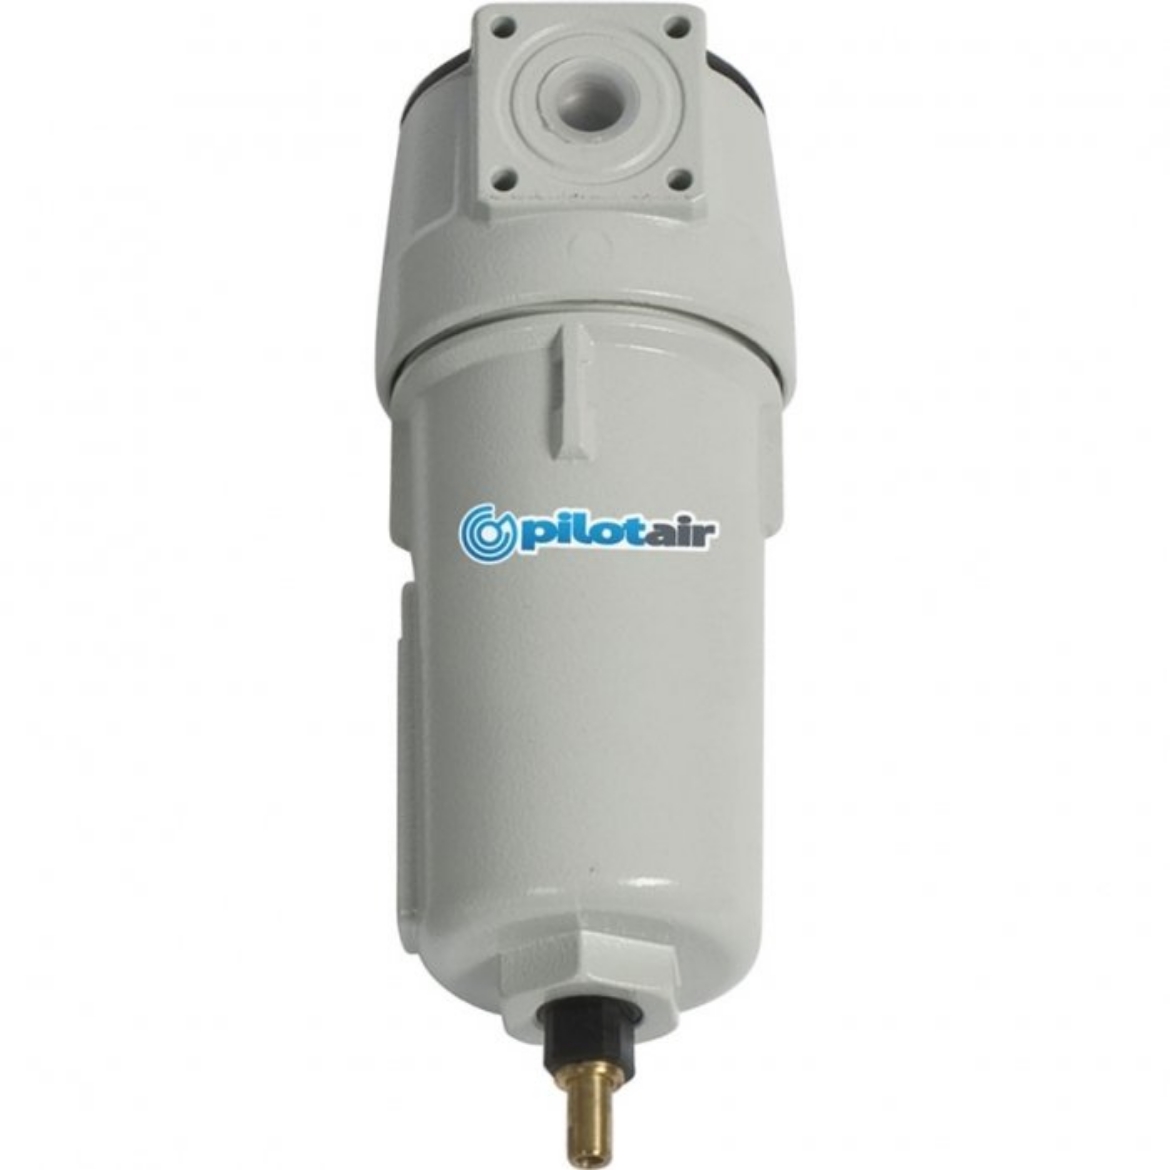 Picture of FTP012 - 3 Micron Pre-Filter for Refrigerated Air Dryer - 1/2" BSPF
Suits TFD-6 & TFD-10 Refrigerated Dryers